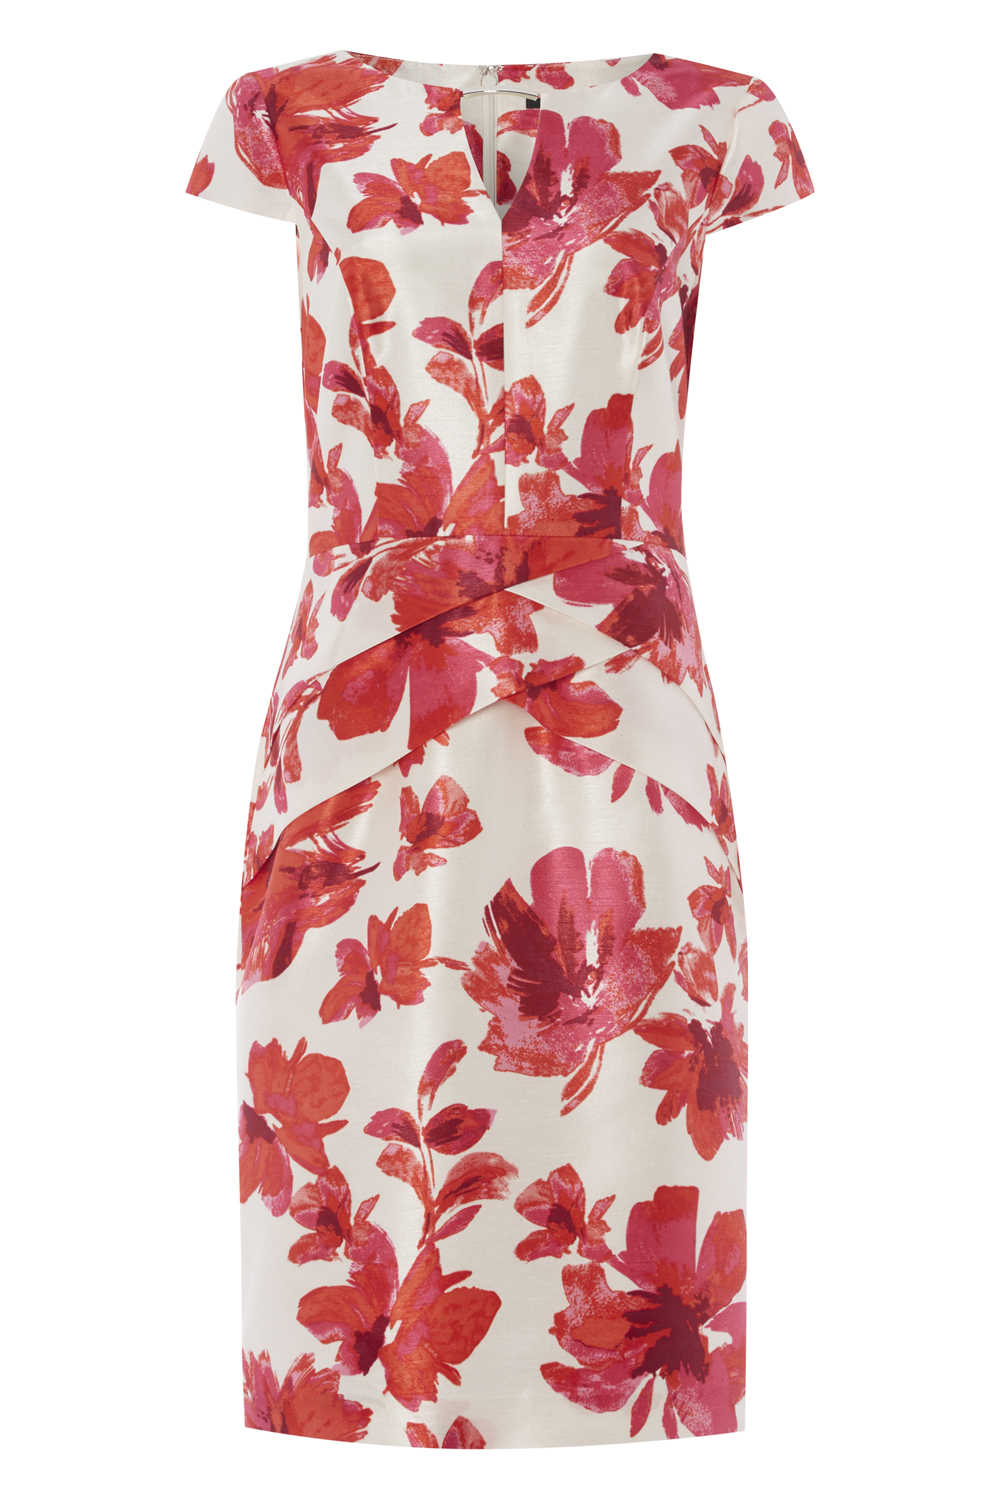 Fuchsia Floral Pleat Detail Dress, Image 2 of 5